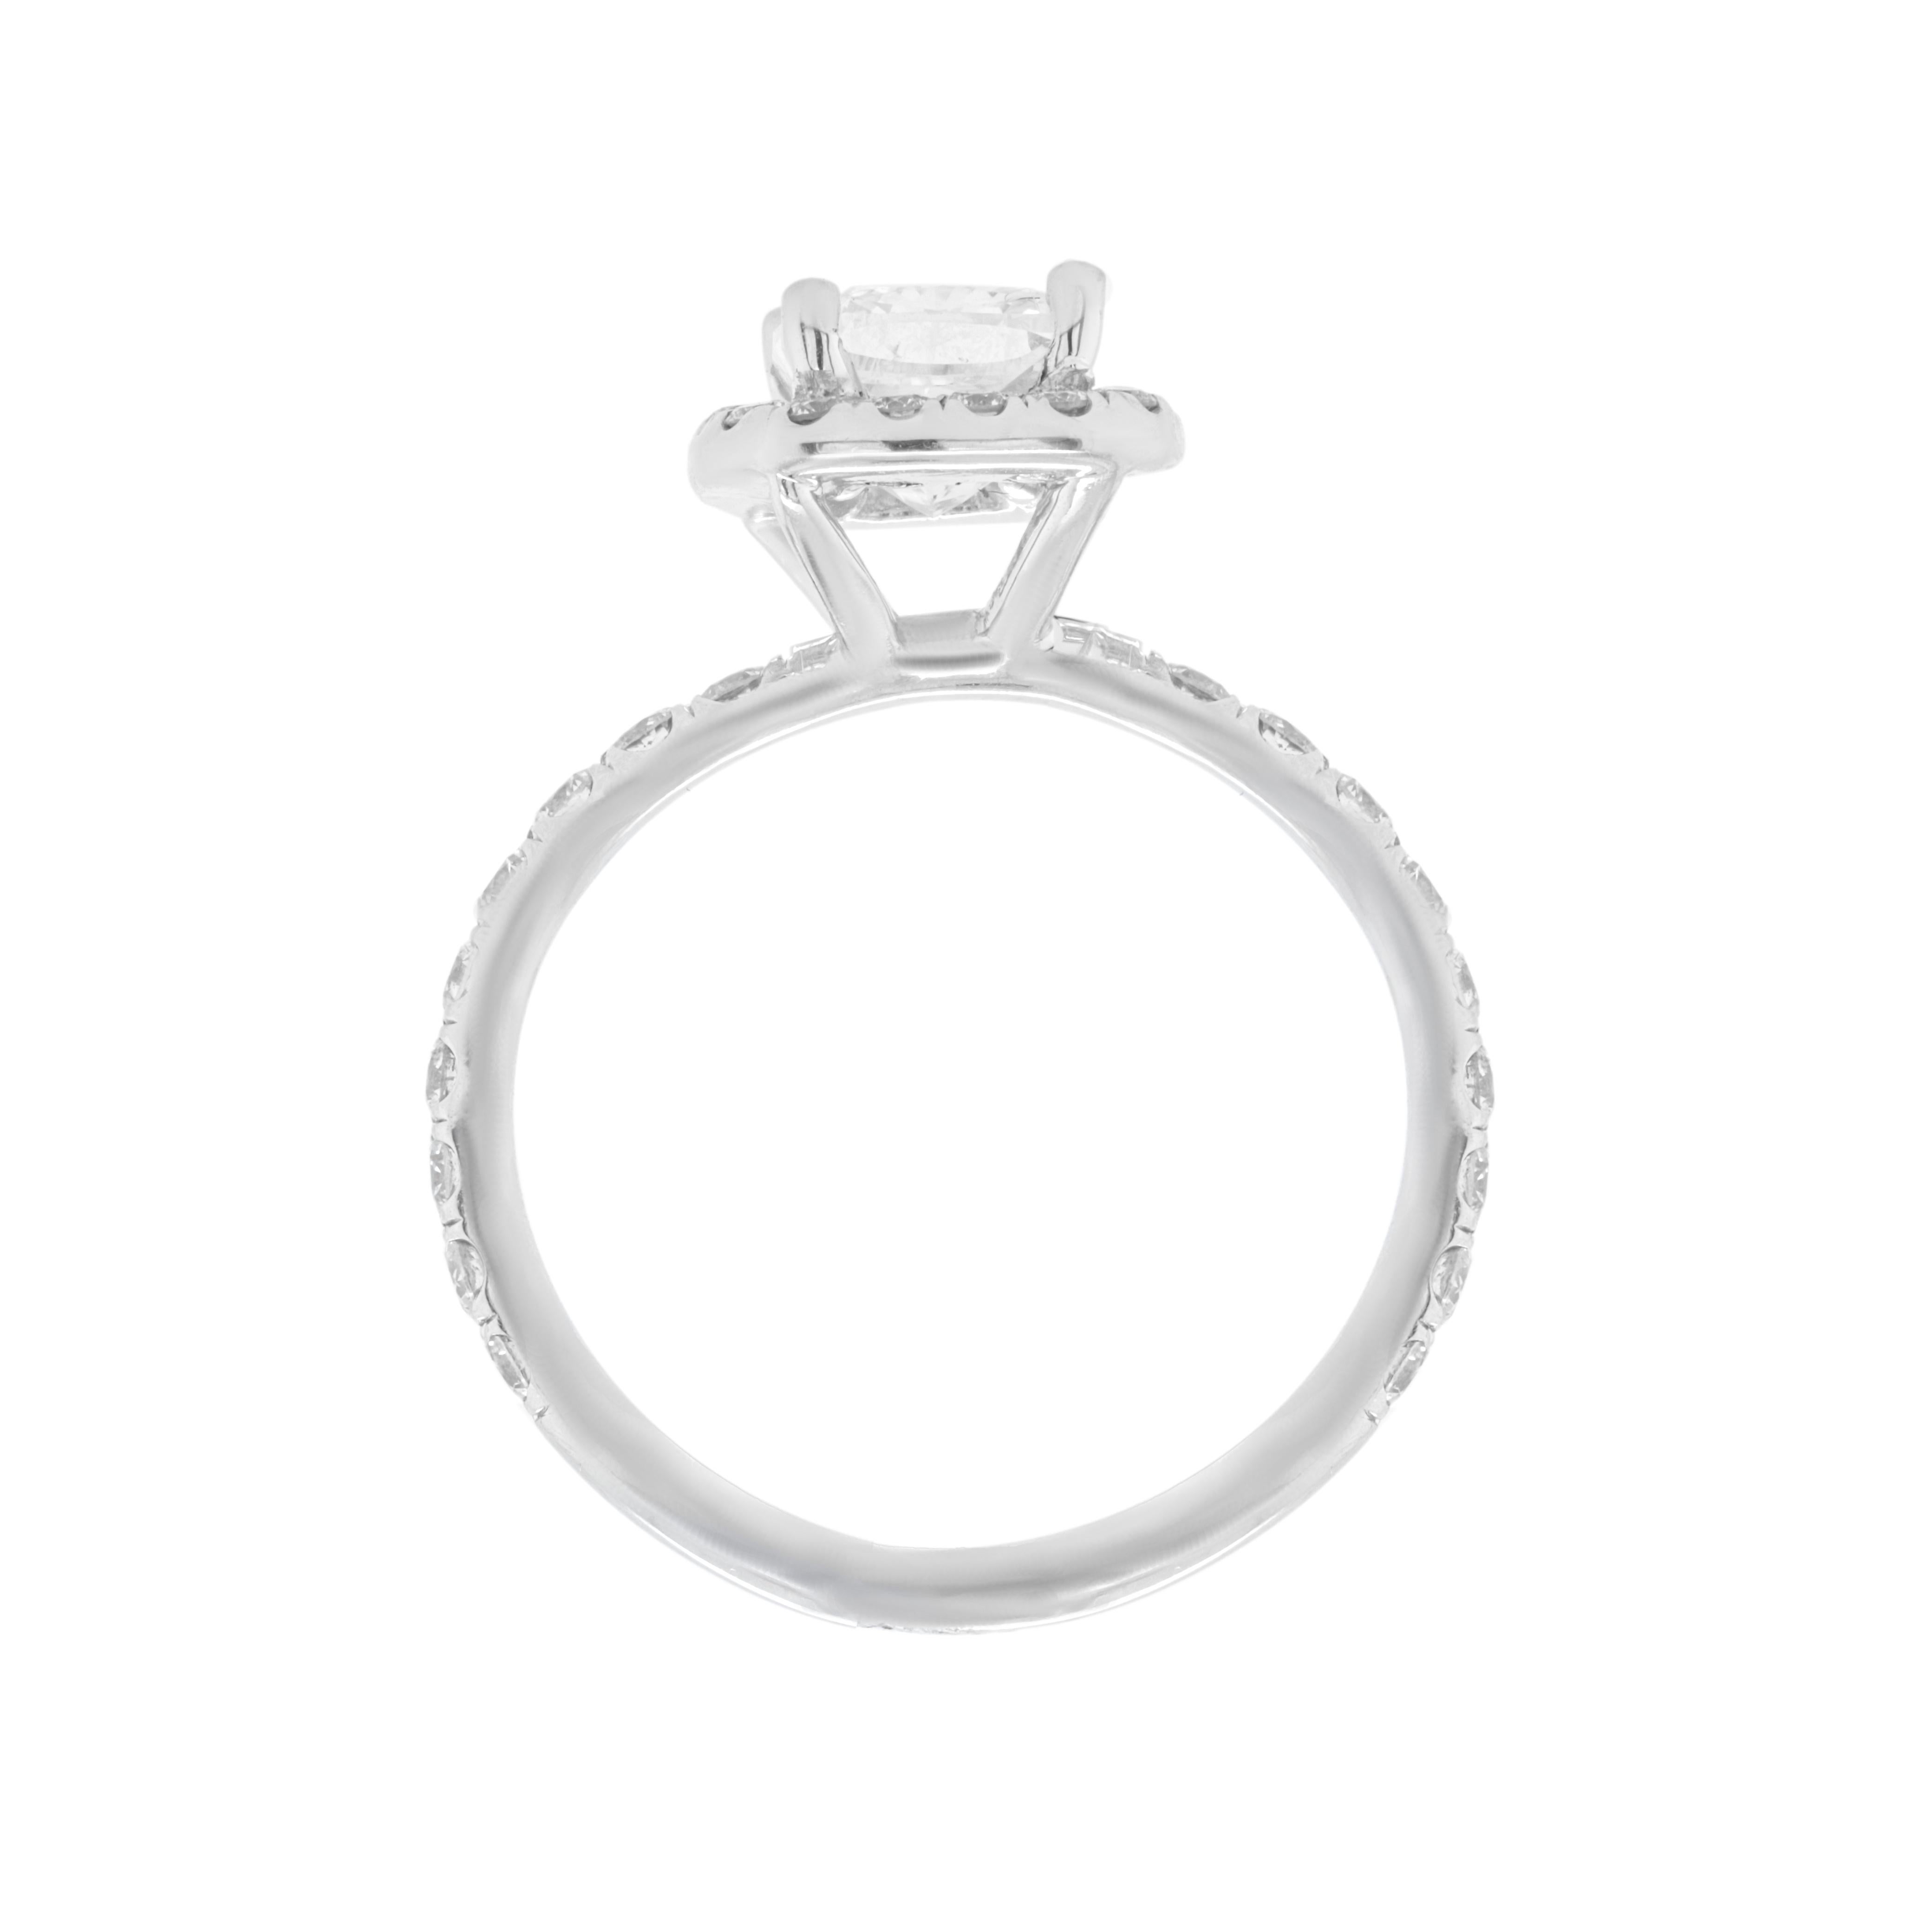 18ktwg wendding two ring, center sone 1.05cts f-vs2 ce cushion with settings 1.30cts total around diamonds
